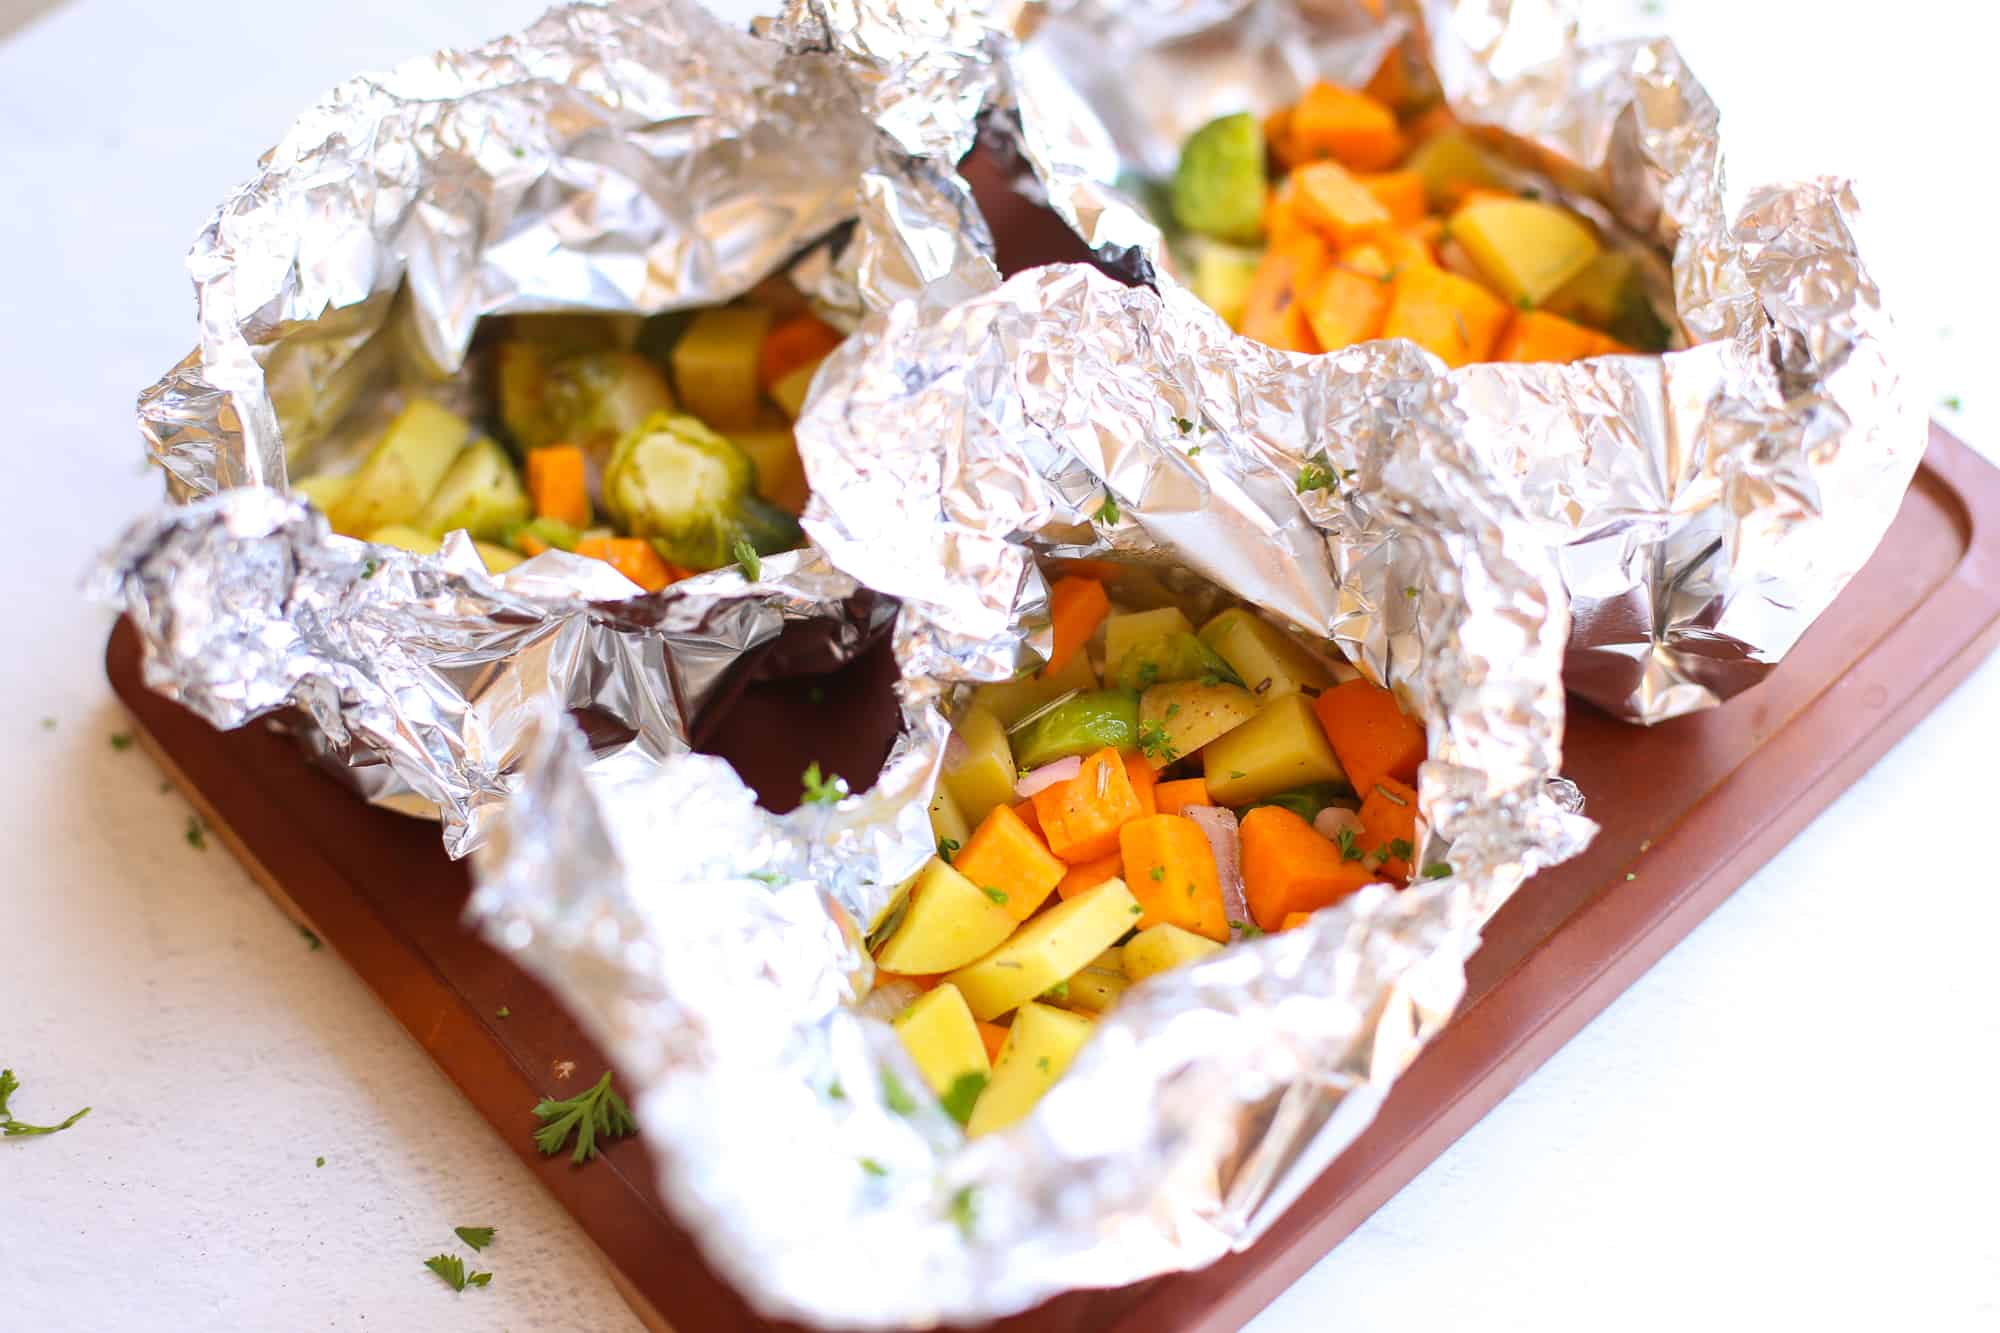 Foil packs with veggies inside ready to eat.